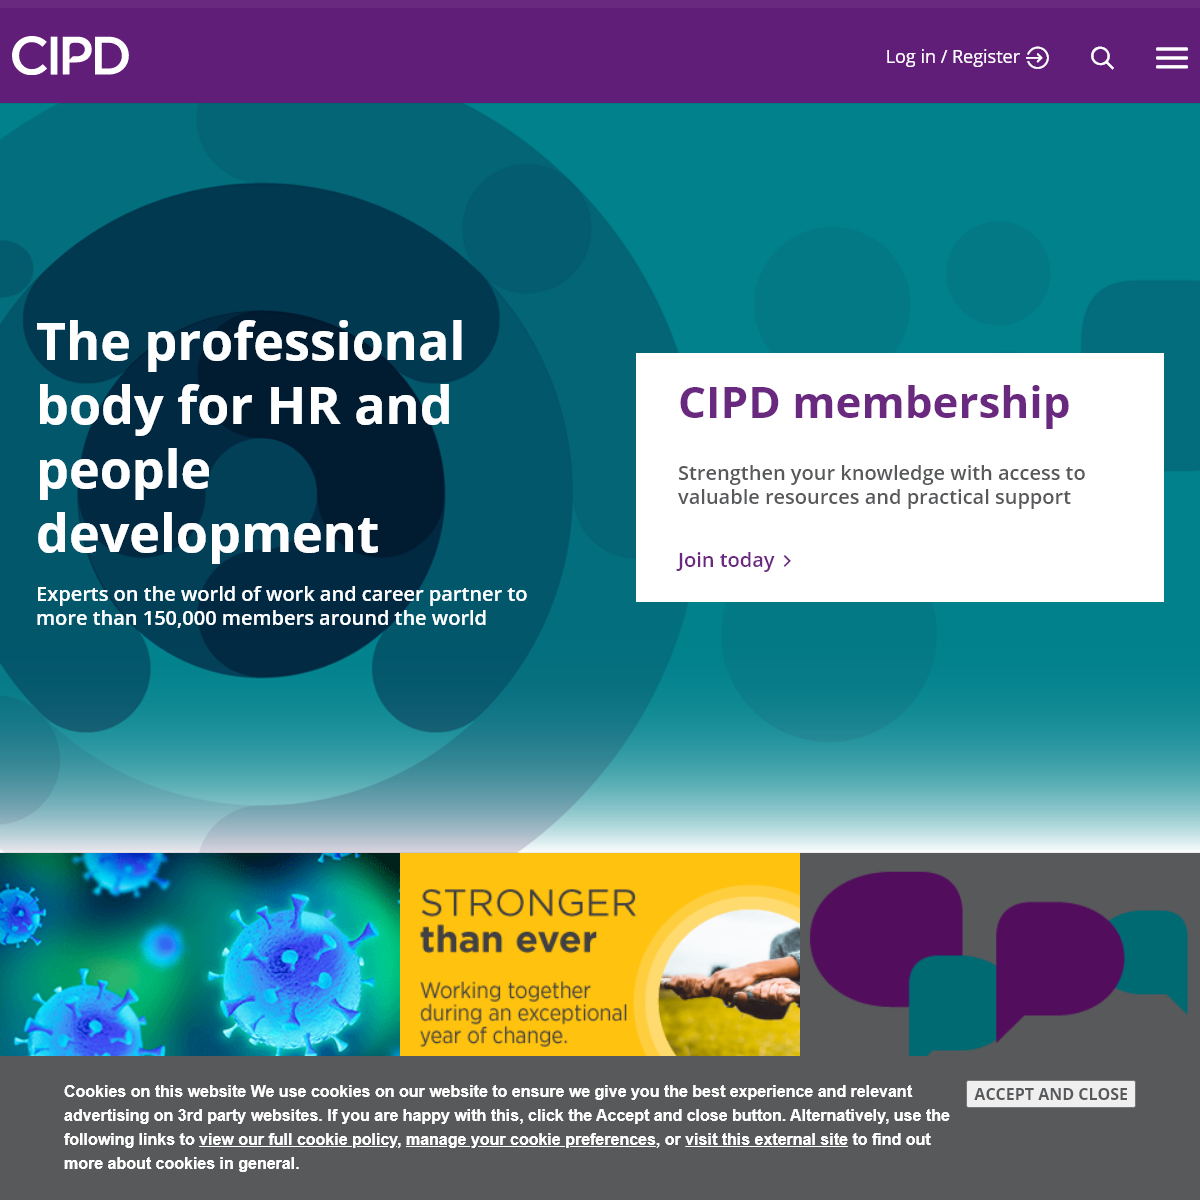 A complete backup of cipd.co.uk